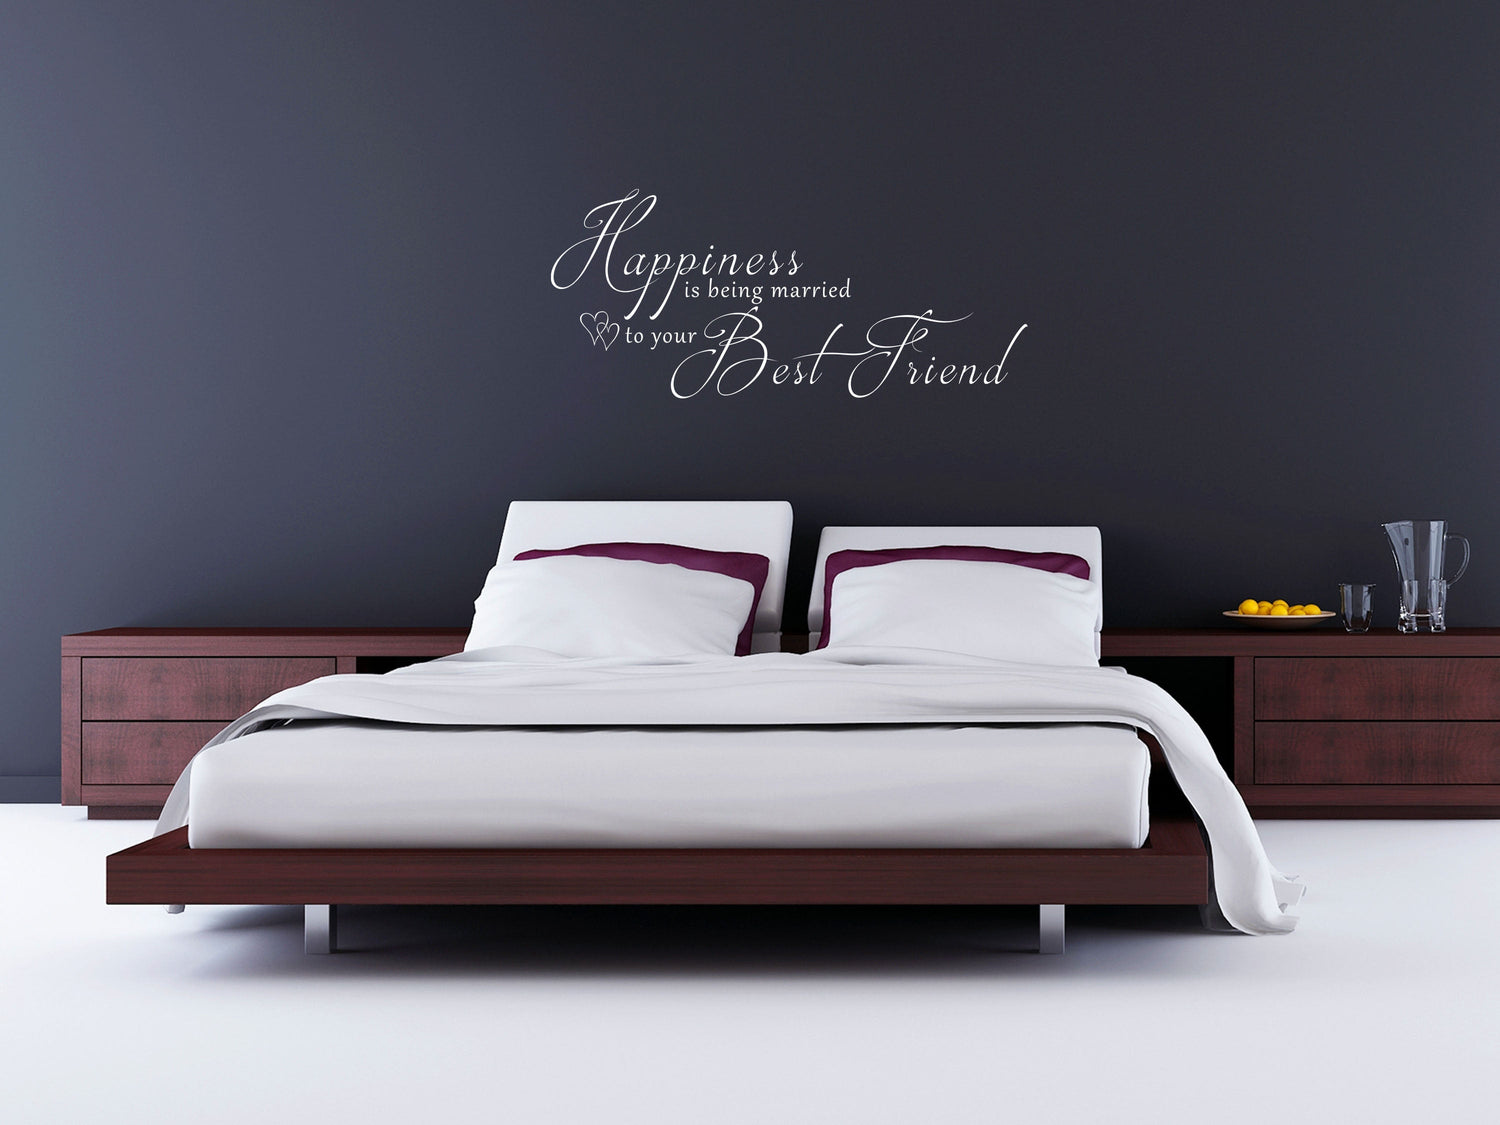 Happiness Is Being Married To Your Best Friend Vinyl Wall Decal Inspirational Wall Signs 